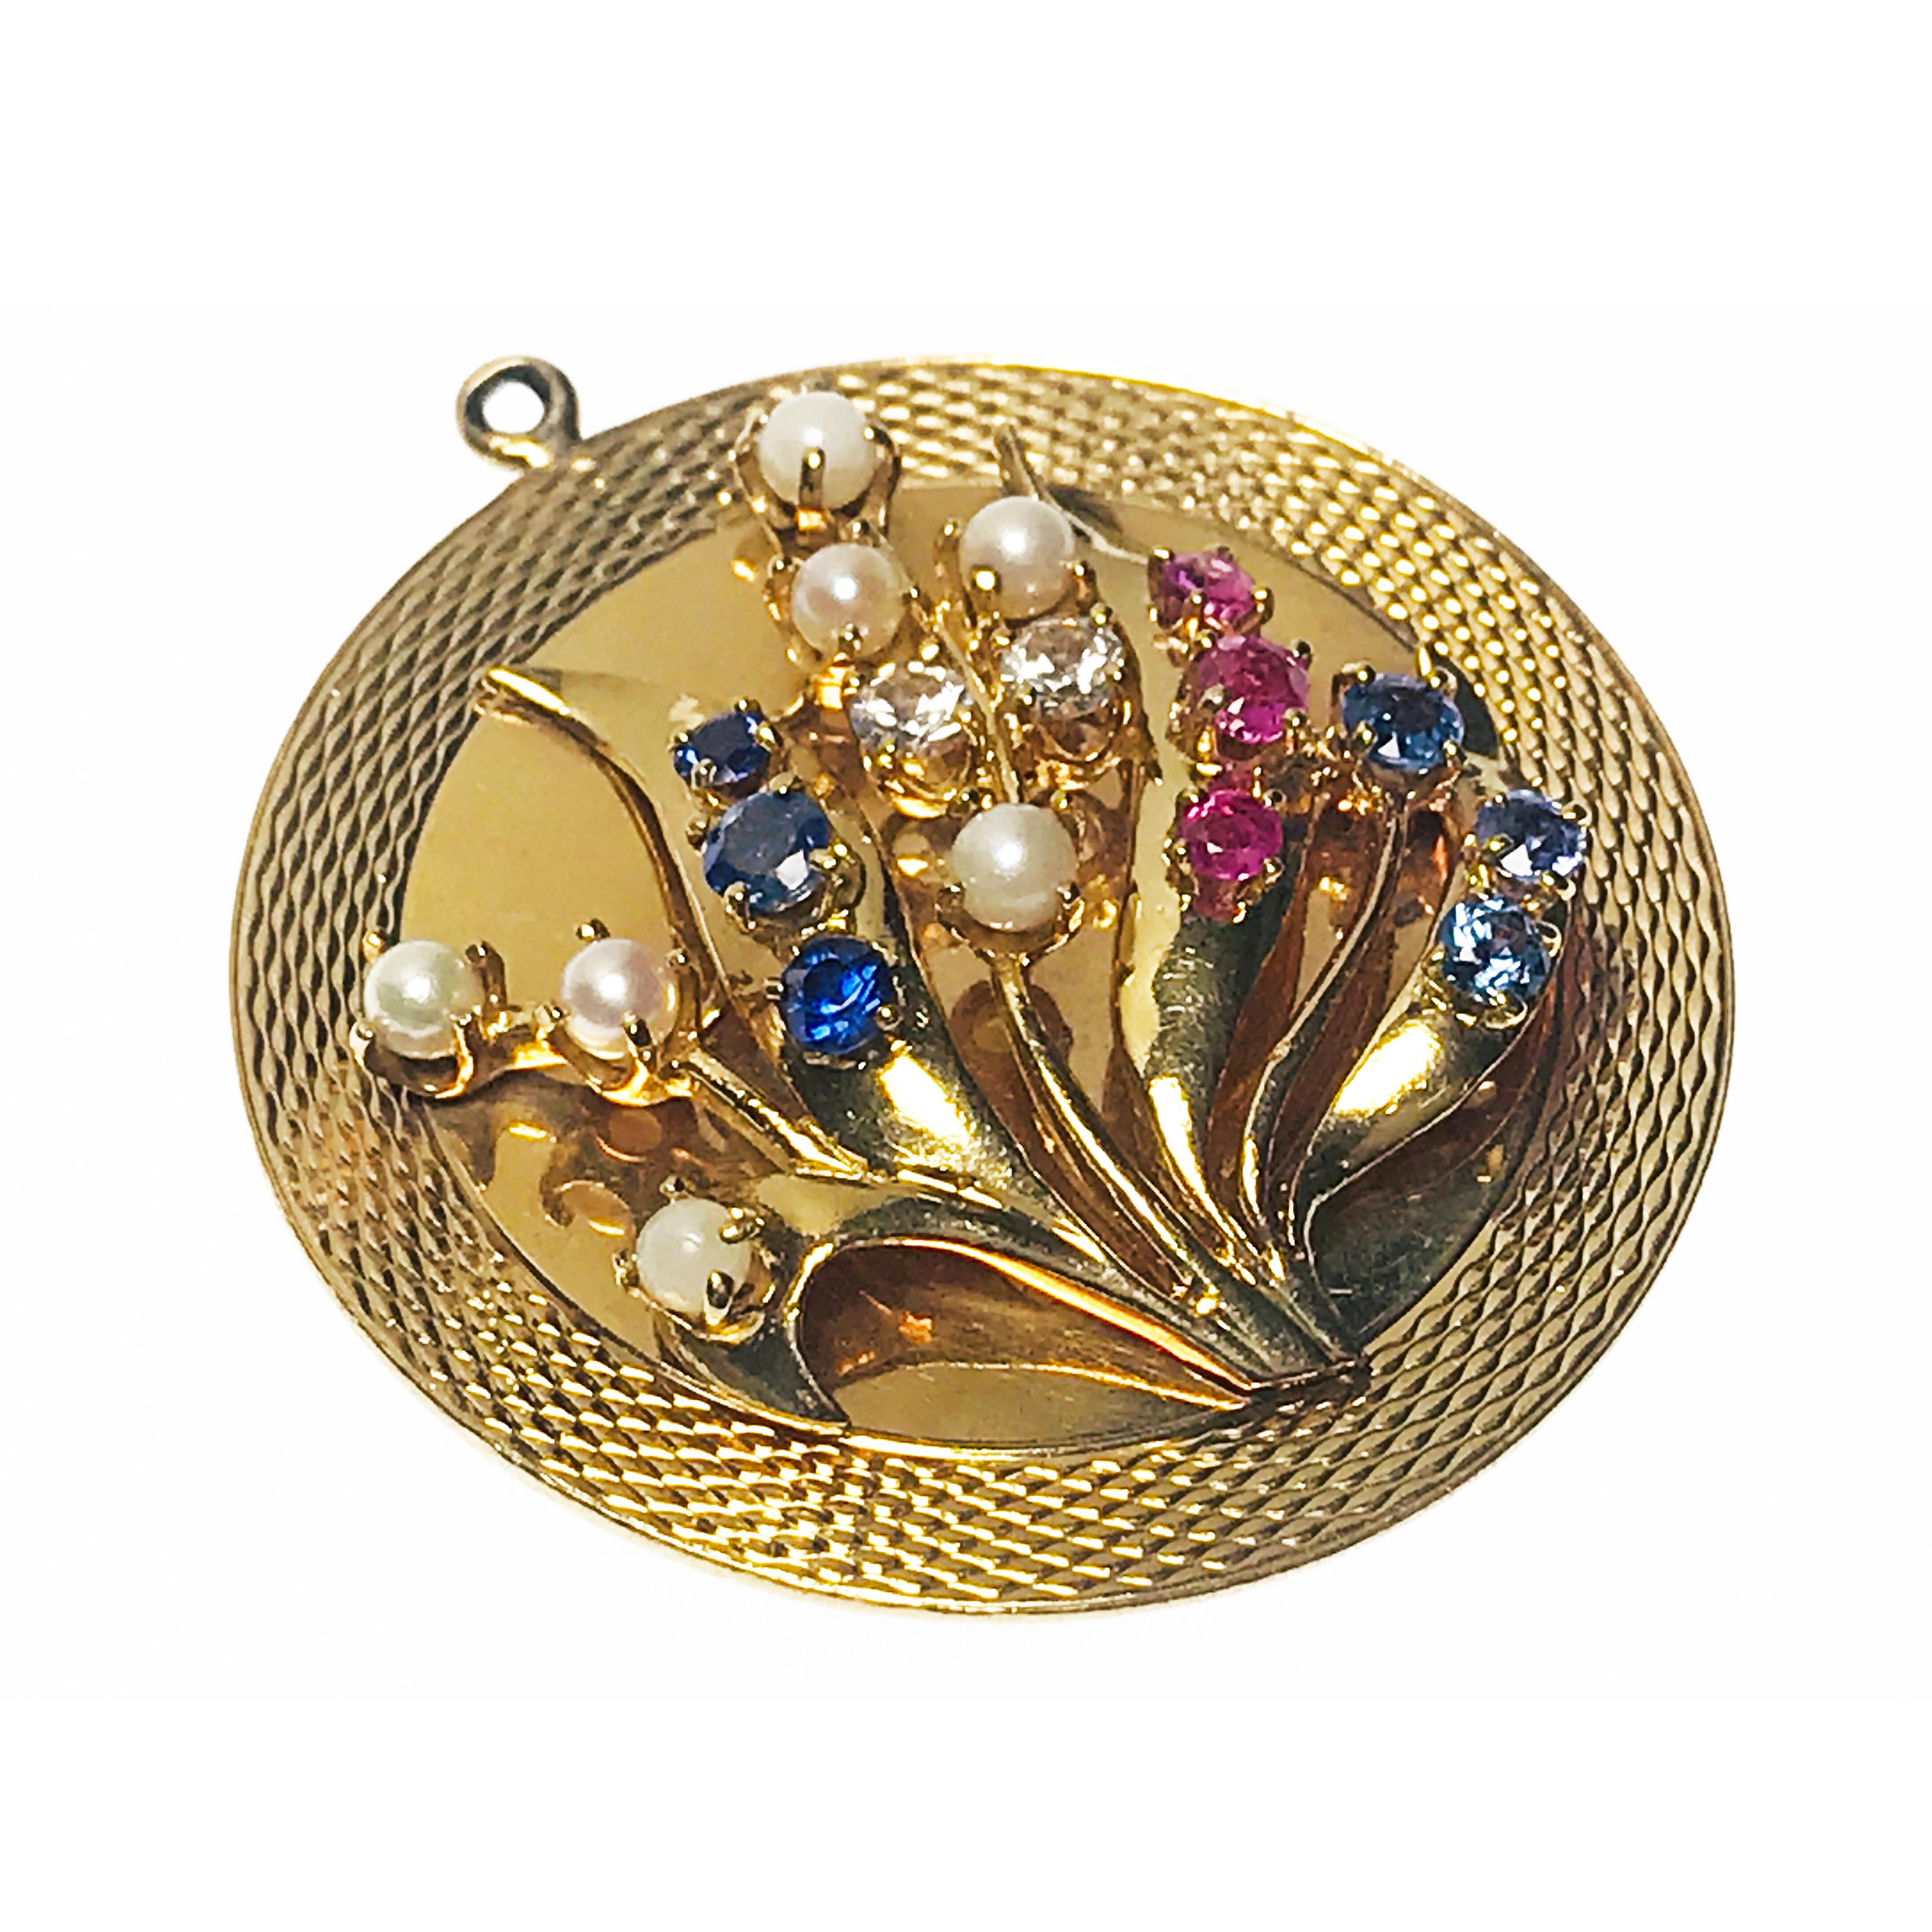 Large Multi-Gemstone Pearl Floral Pendant. Large 14k yellow gold pendant with eleven gemstones, seven pearls, all prong set in a floral design of leaves. The seven pearls are 3.5mm, graduate sizes of three Rubies, three blue Sapphires, three blue